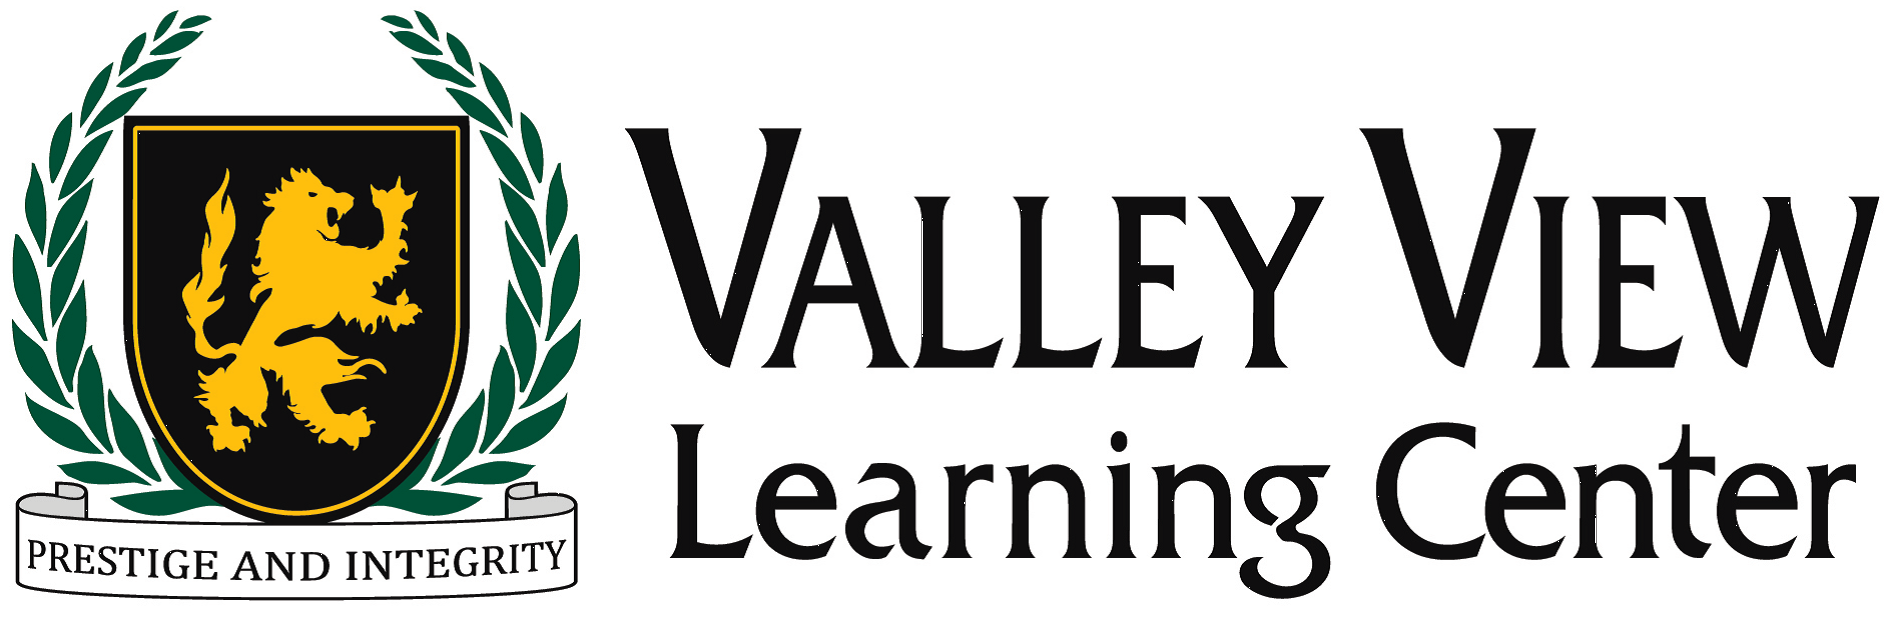 Valley View Learning Center logo